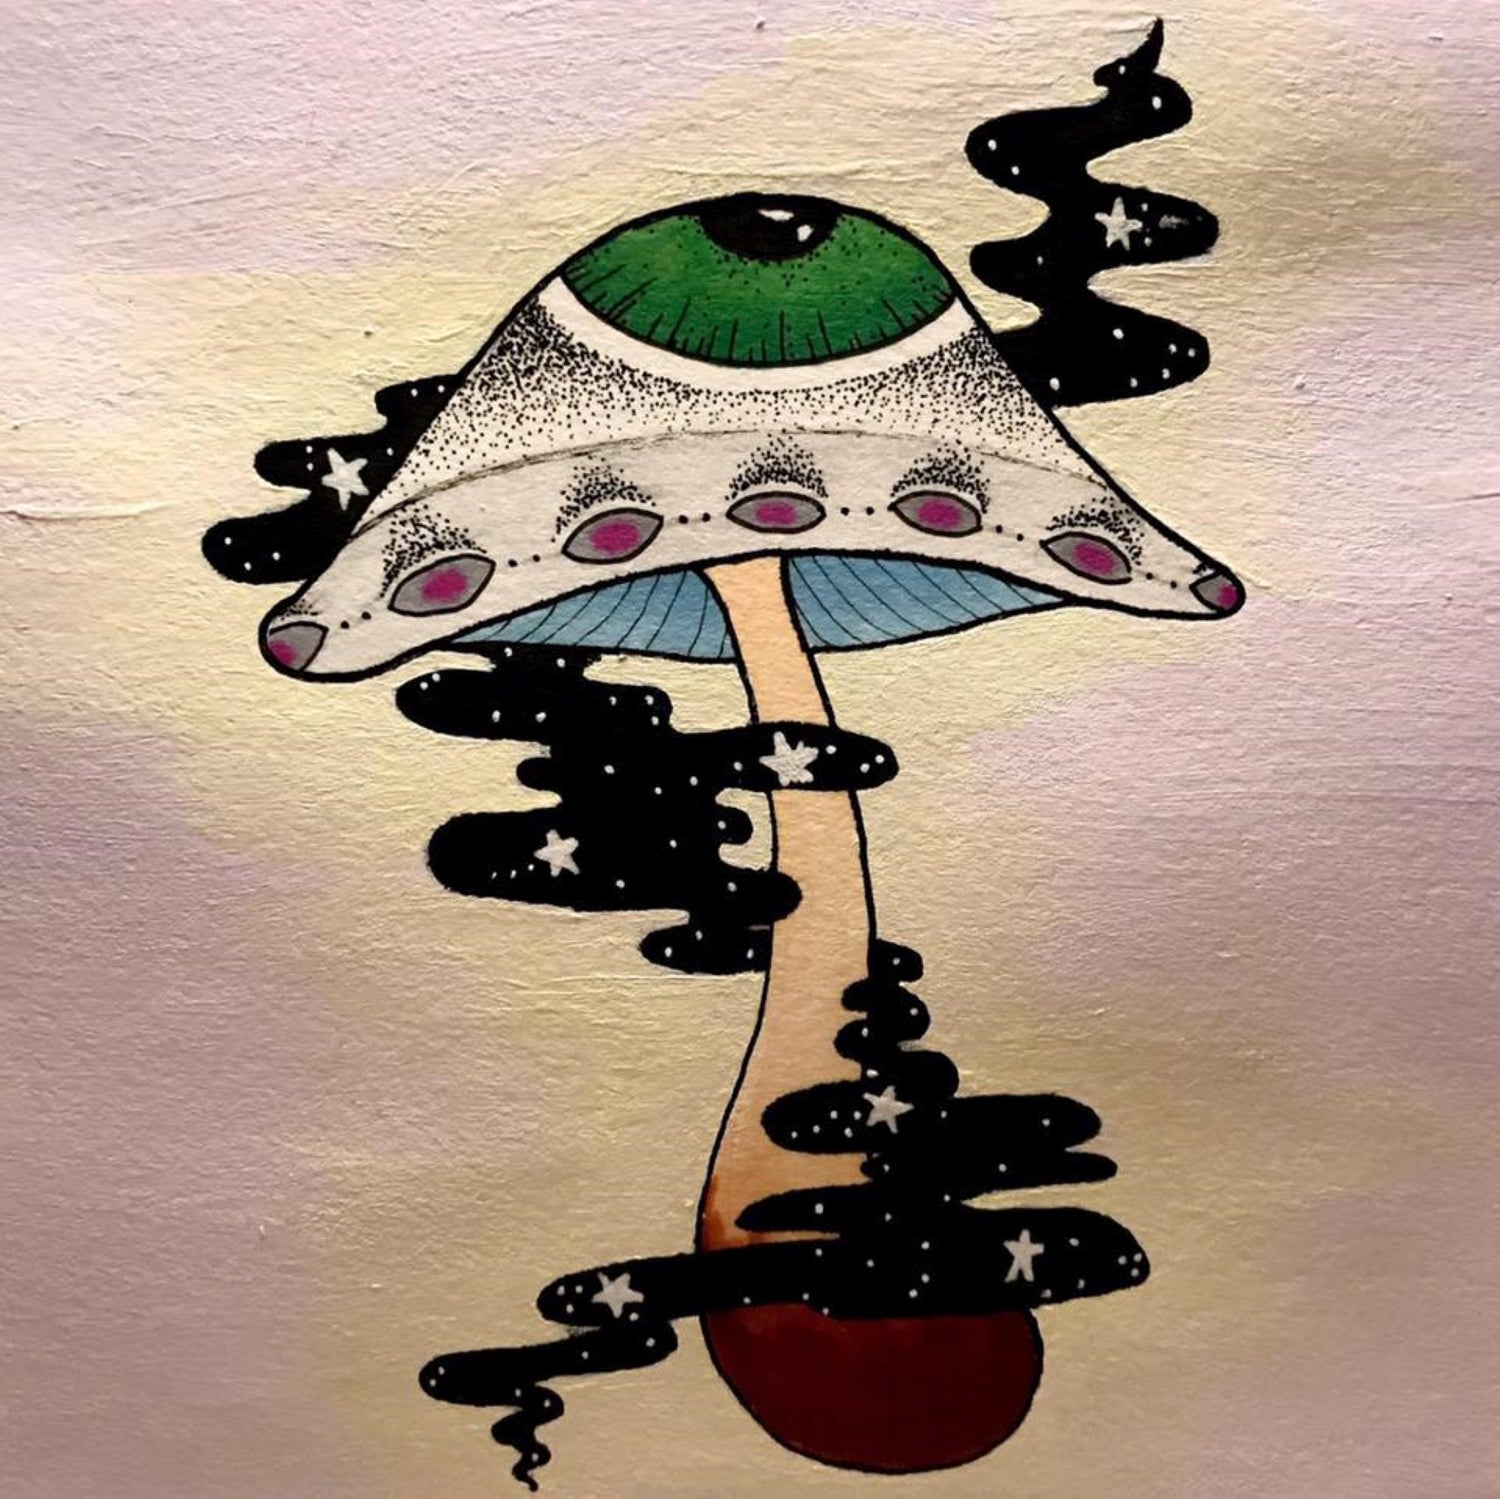 a drawing of a mushroom with a green eye and other decorations. cartoonish black smoke swirls around it from bottom to top and little white dots and stars fill the smoke to make it look like night sky. there is a faint light purple and yellow background. 